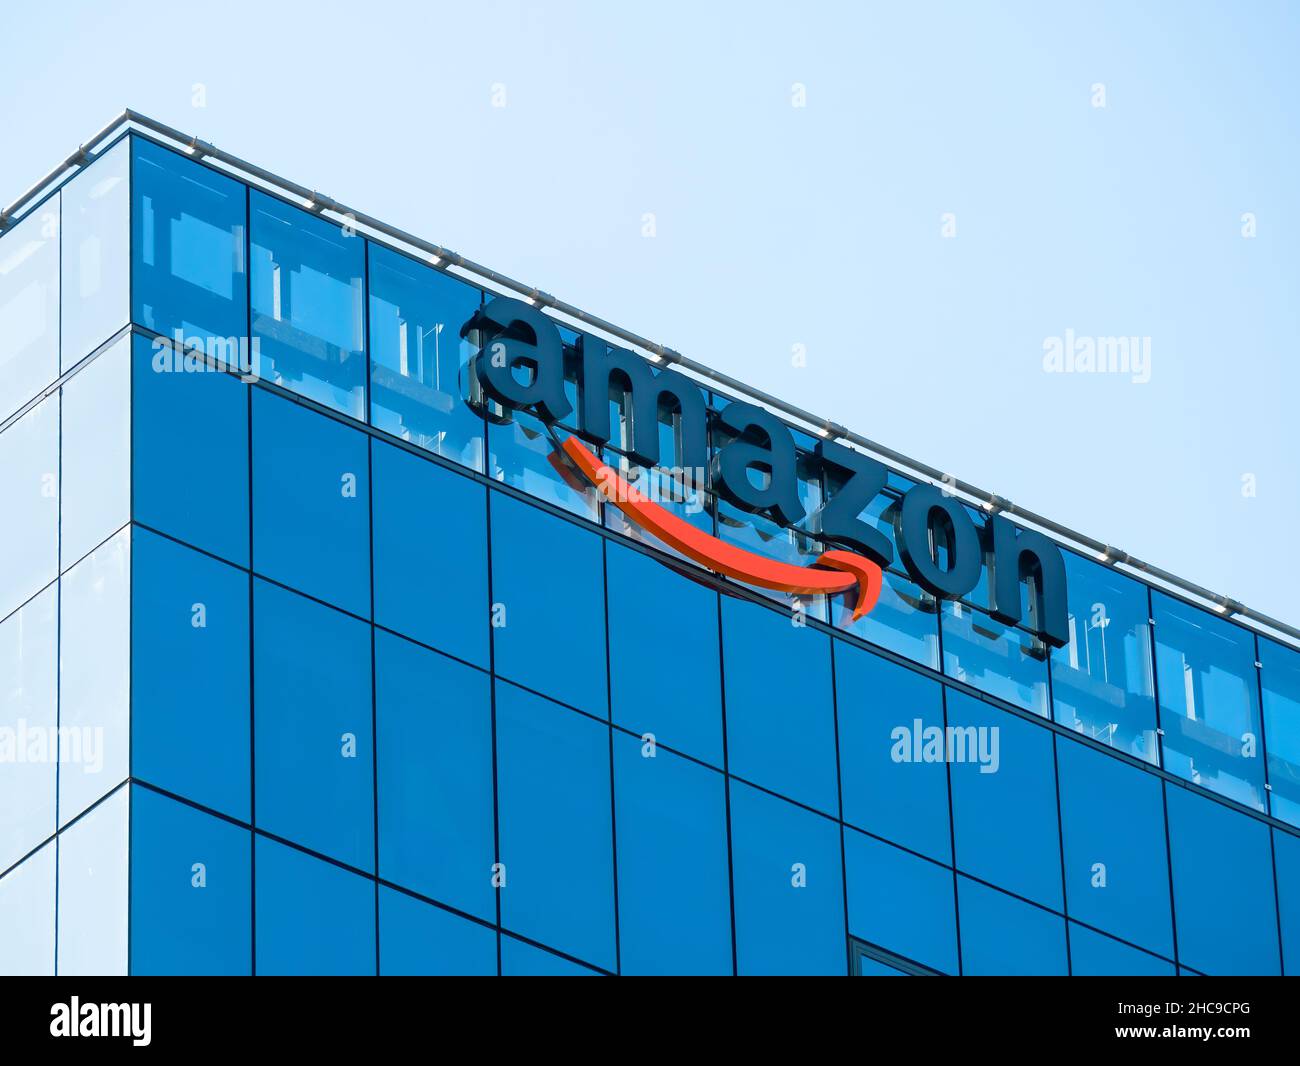 Amazon Building Logo High Resolution Stock Photography and Images - Alamy